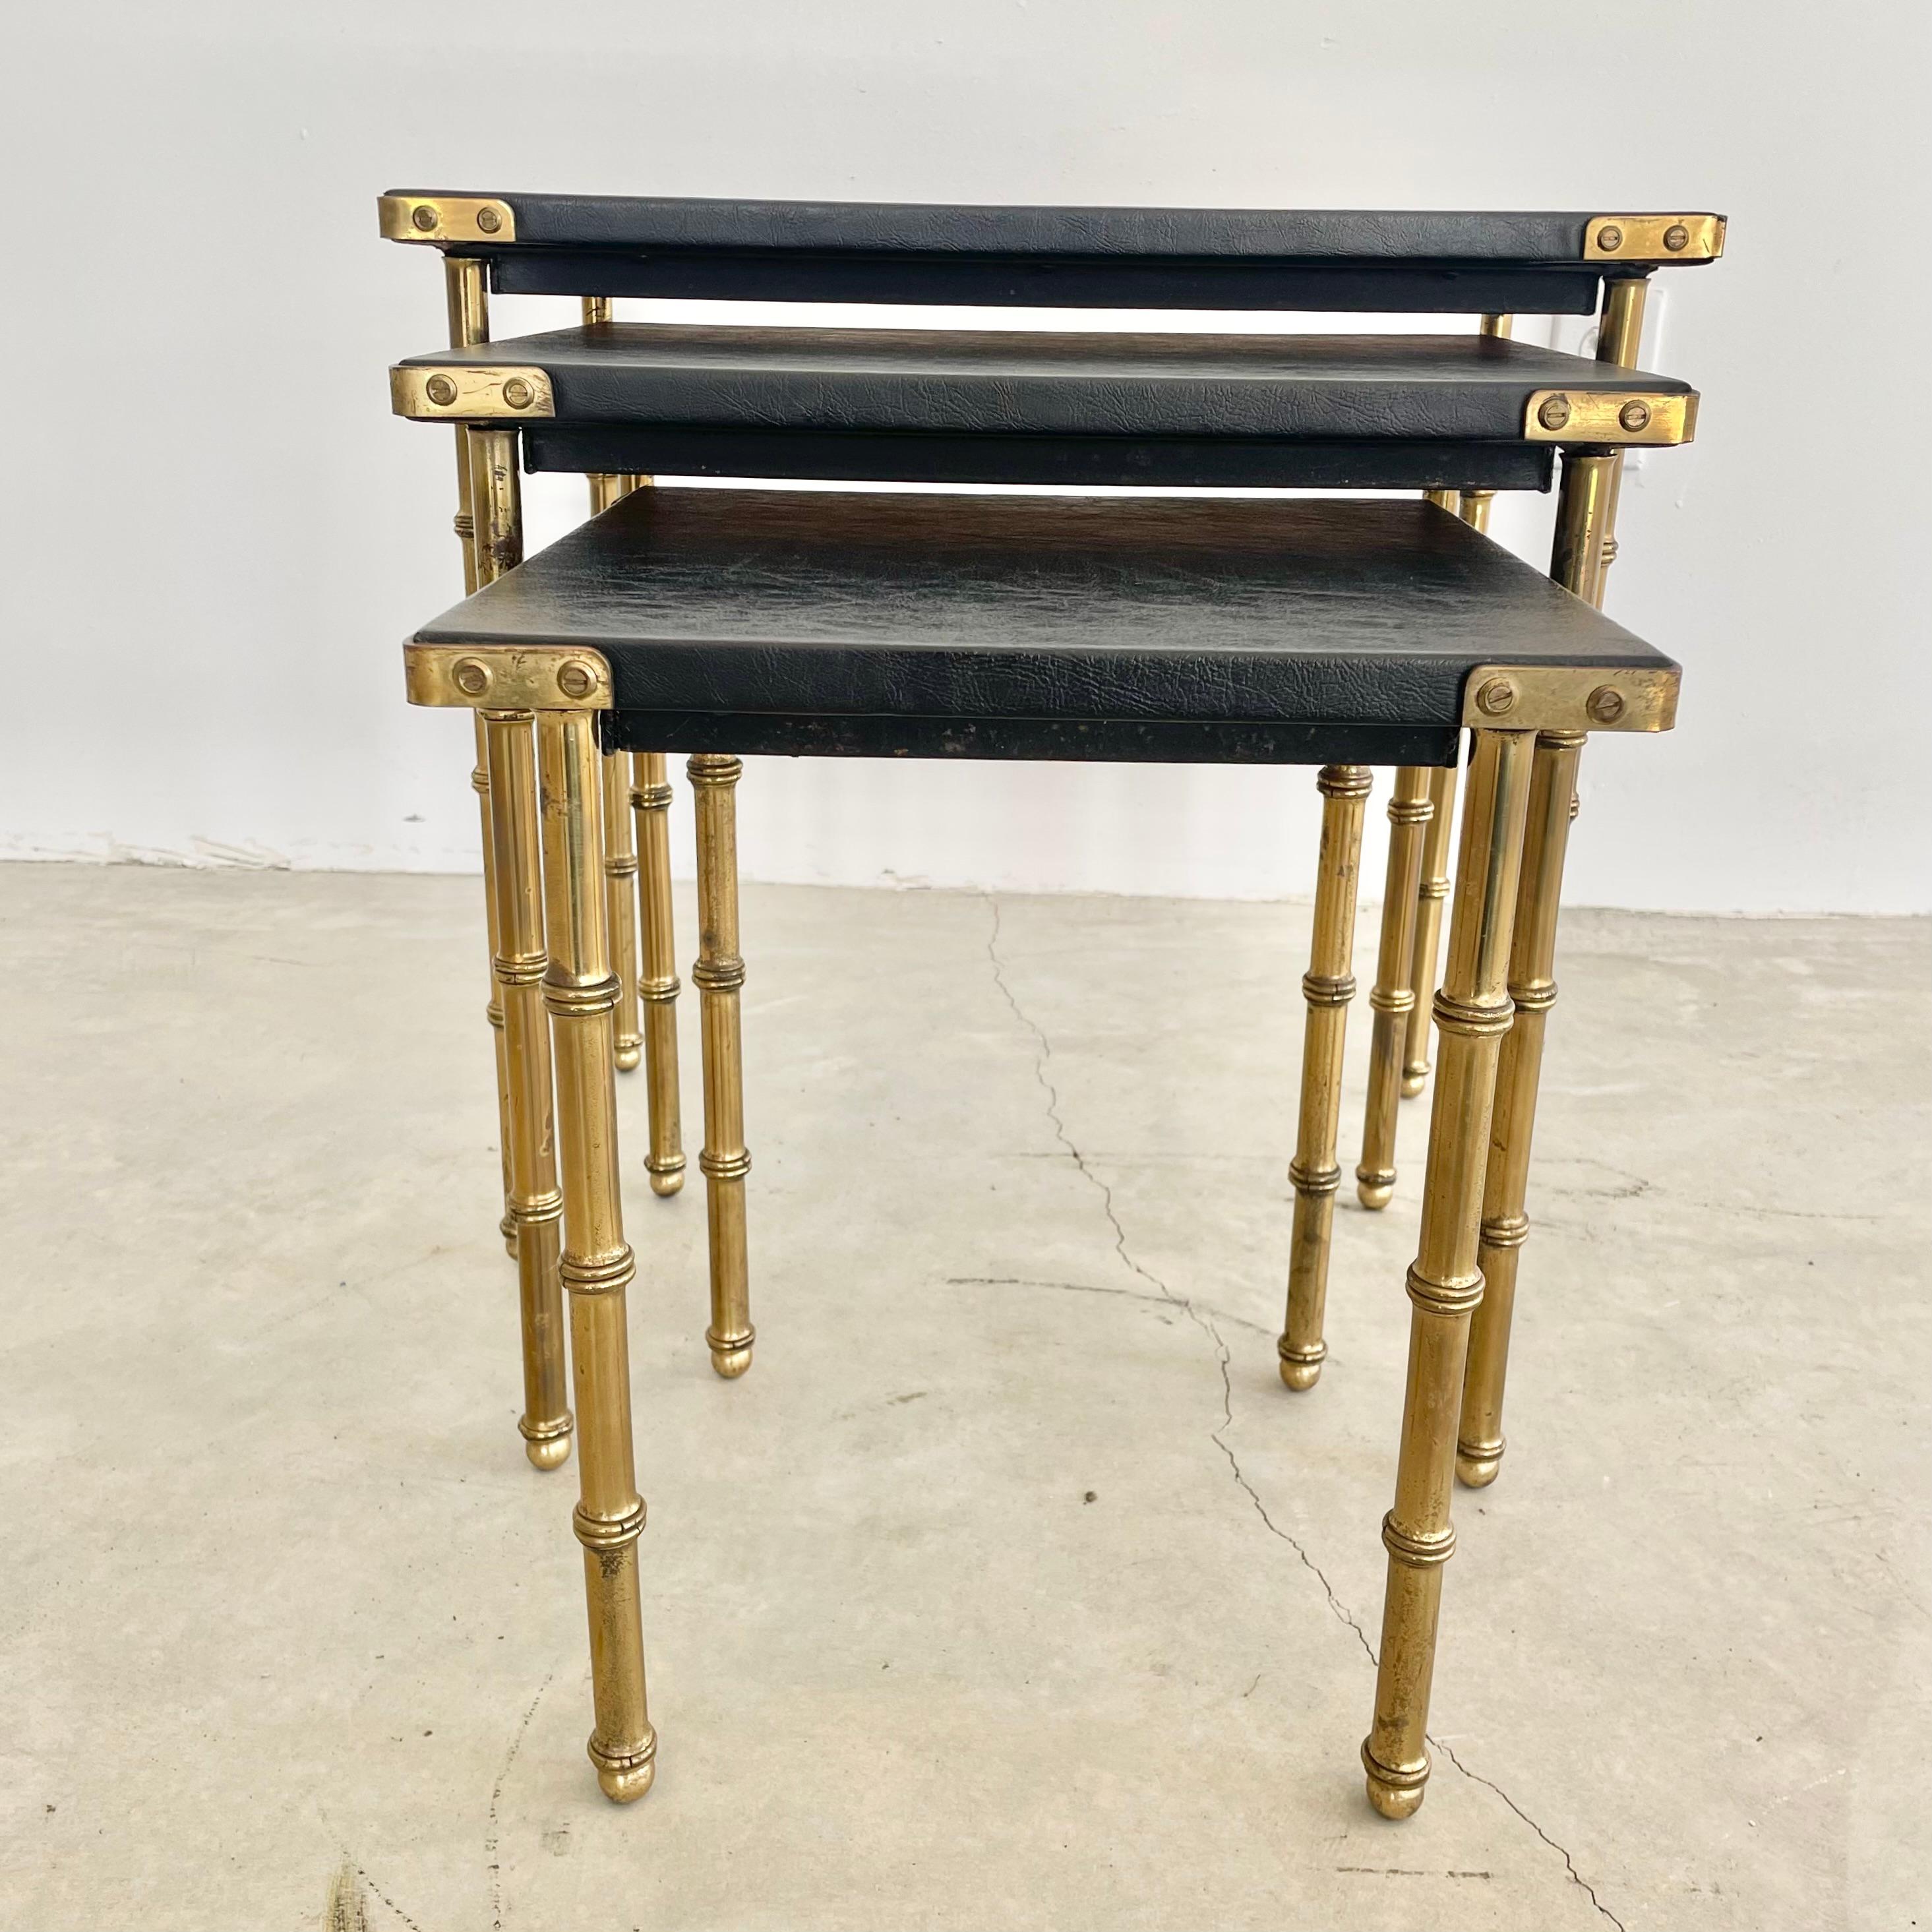 Metal Set of 3 Jacques Adnet Nesting Tables, 1950s France For Sale